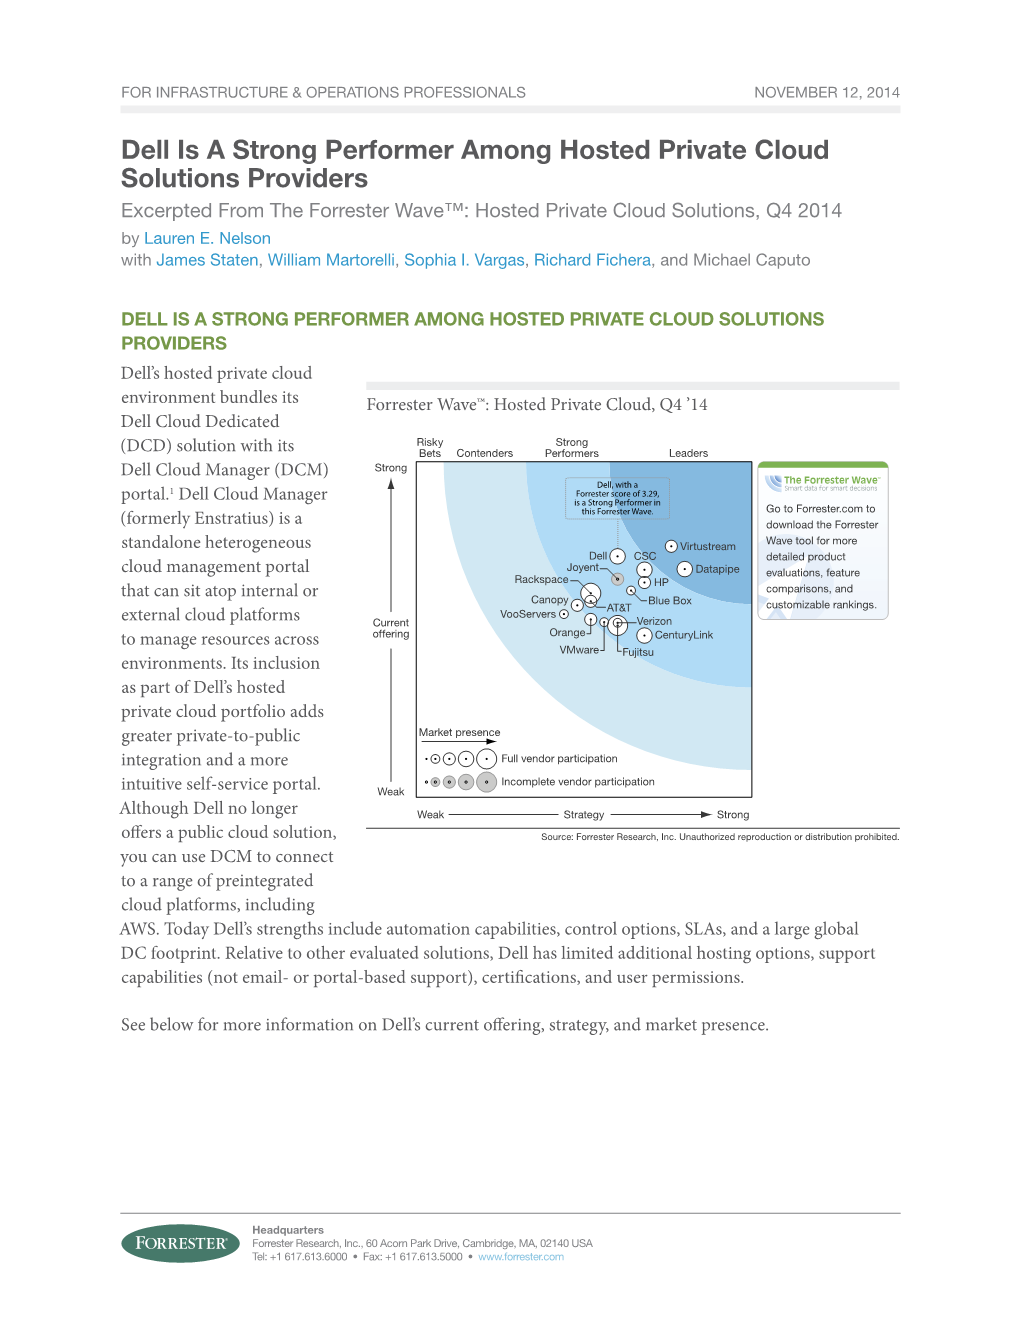 Dell Is a Strong Performer Among Hosted Private Cloud Solutions Providers Excerpted from the Forrester Wave™: Hosted Private Cloud Solutions, Q4 2014 by Lauren E